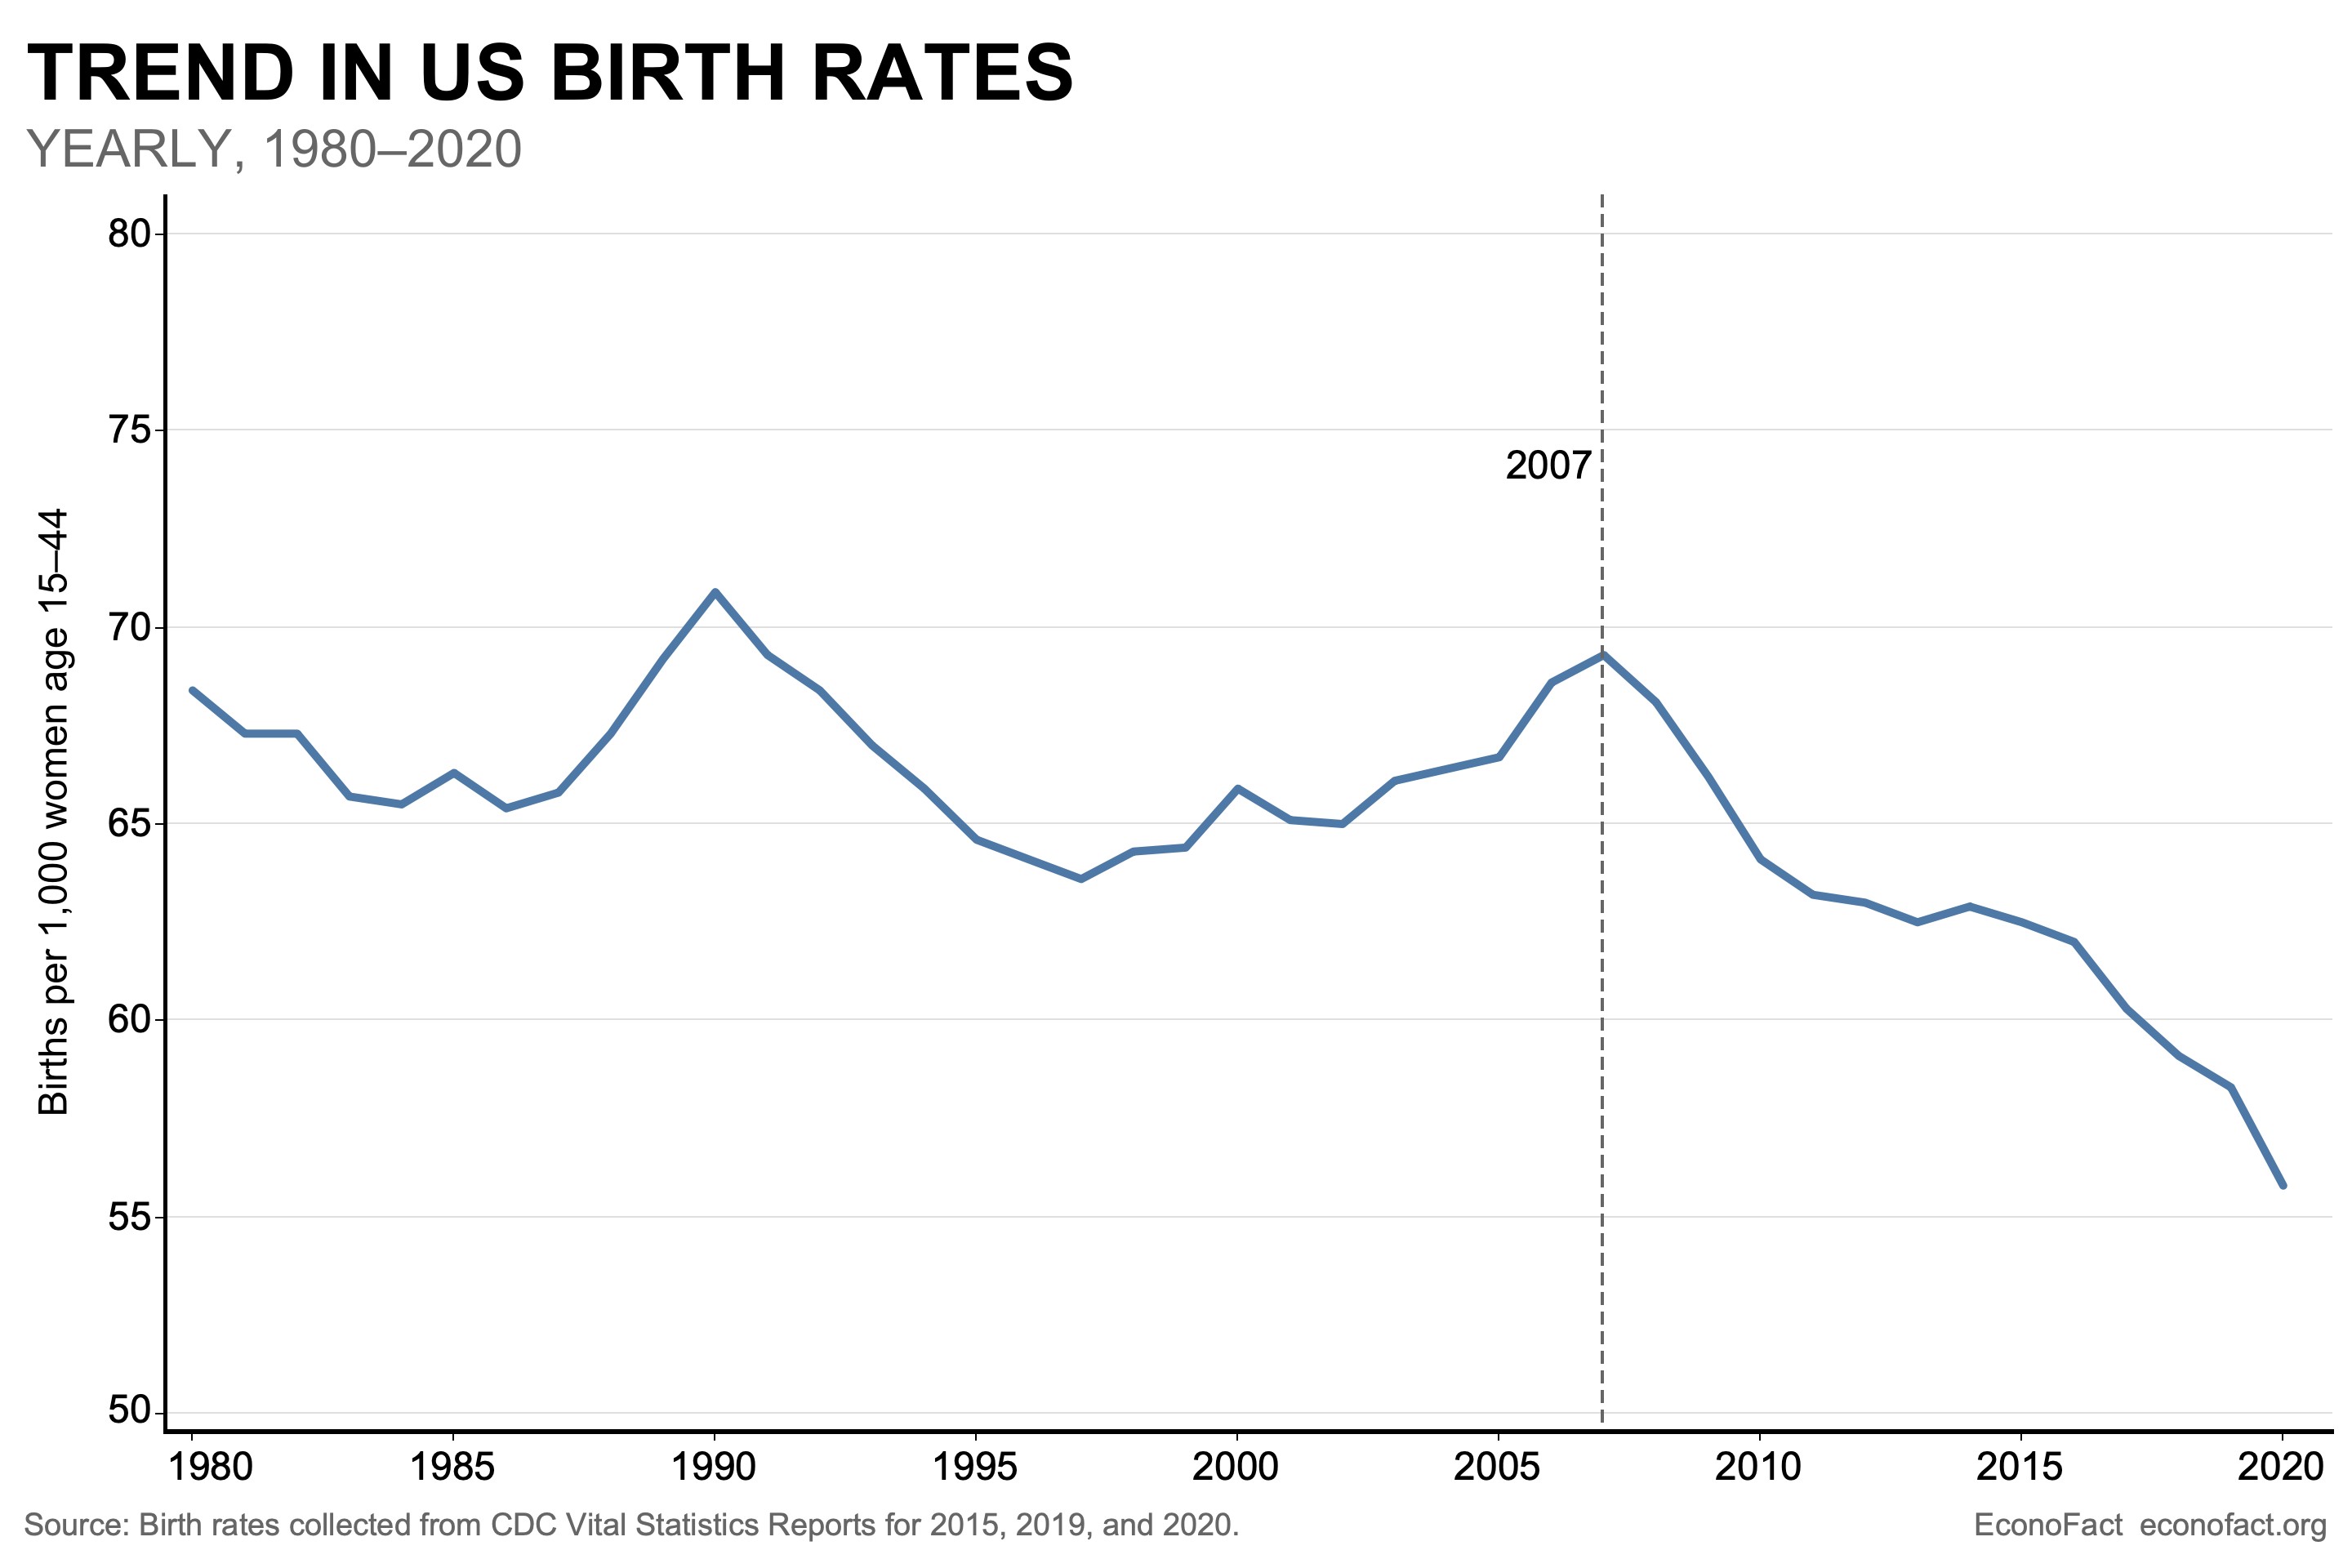 the declining birth rate is represented by a blue line, data spans from 1980 to 2020